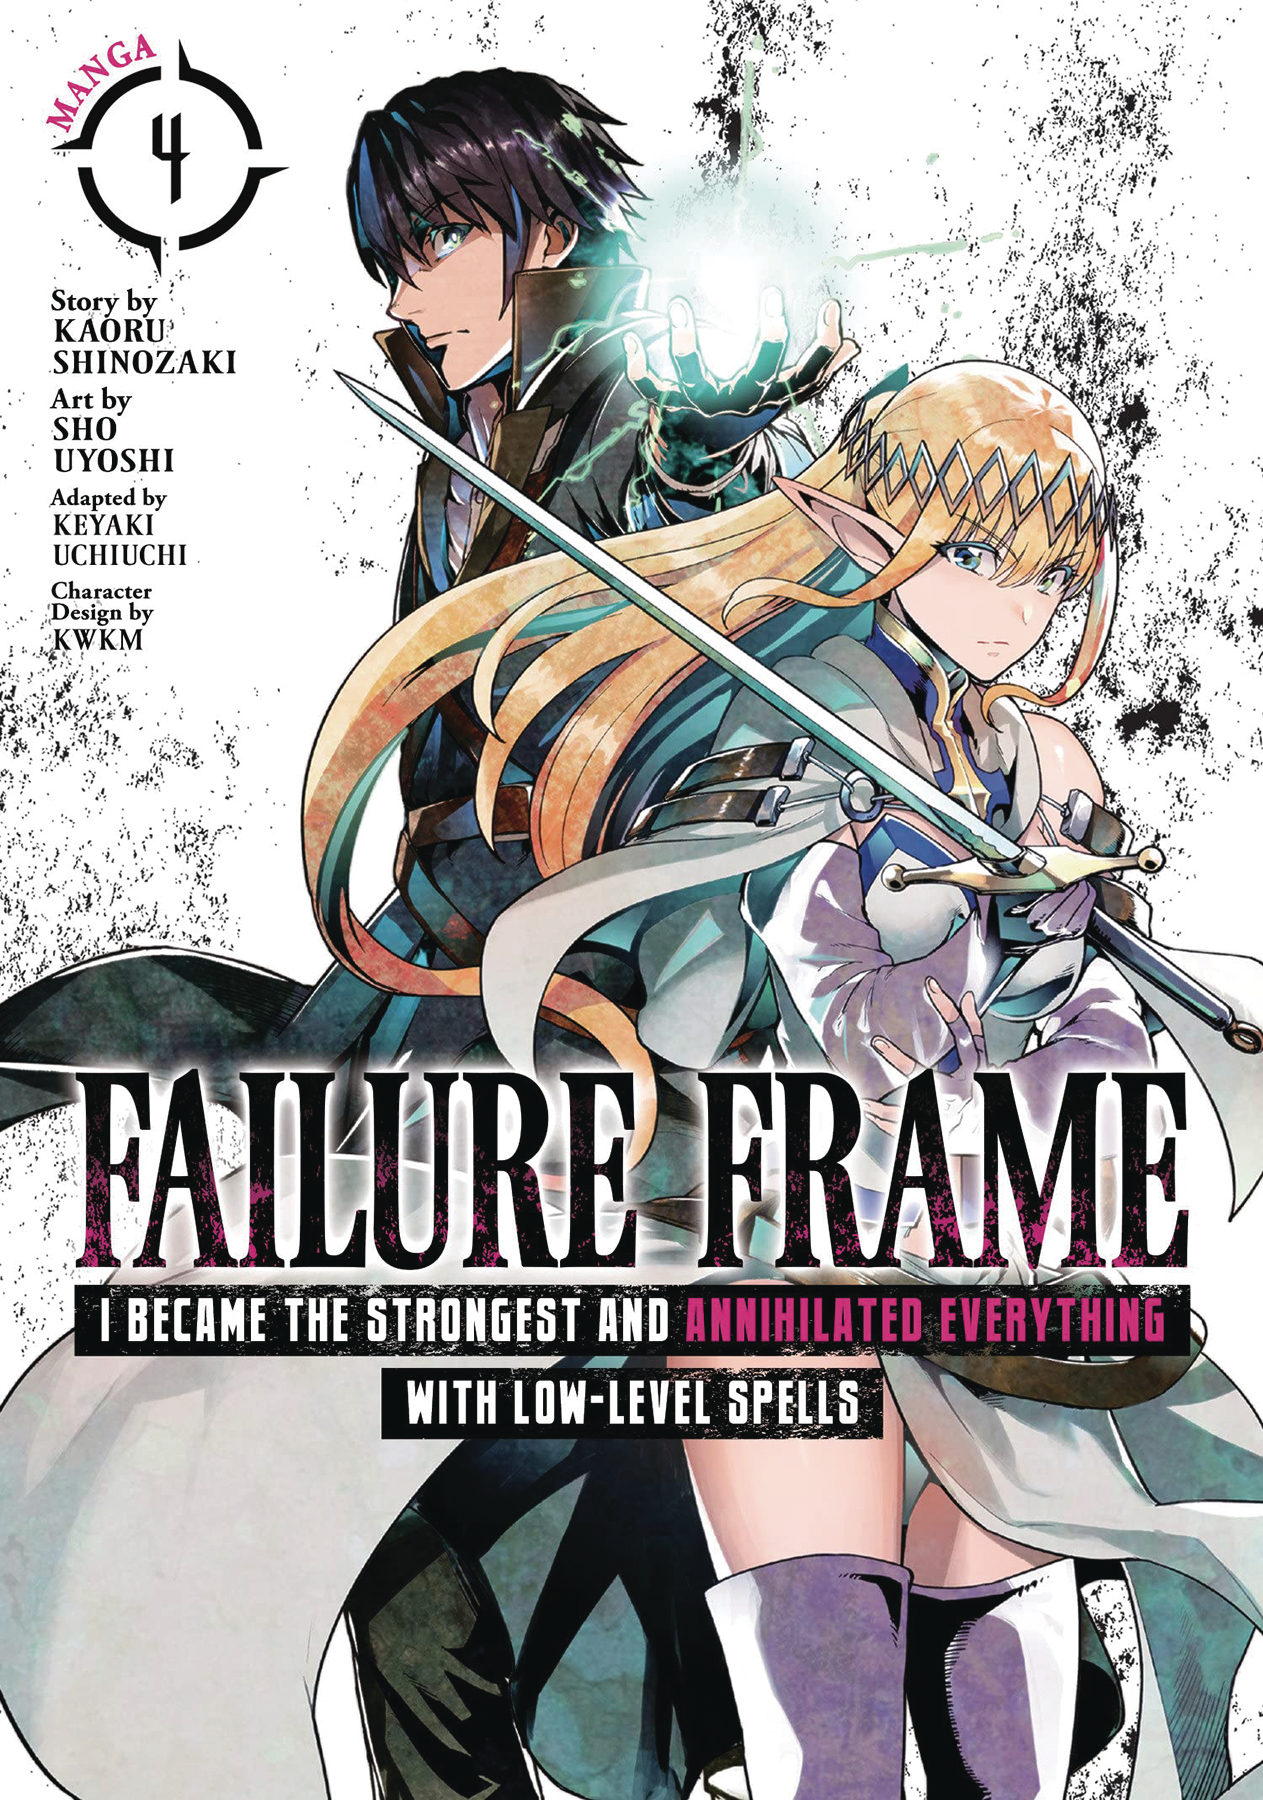 Failure Frame: I Became the Strongest and Annihilated Everything with Low-Level Spells Manga Volume 4